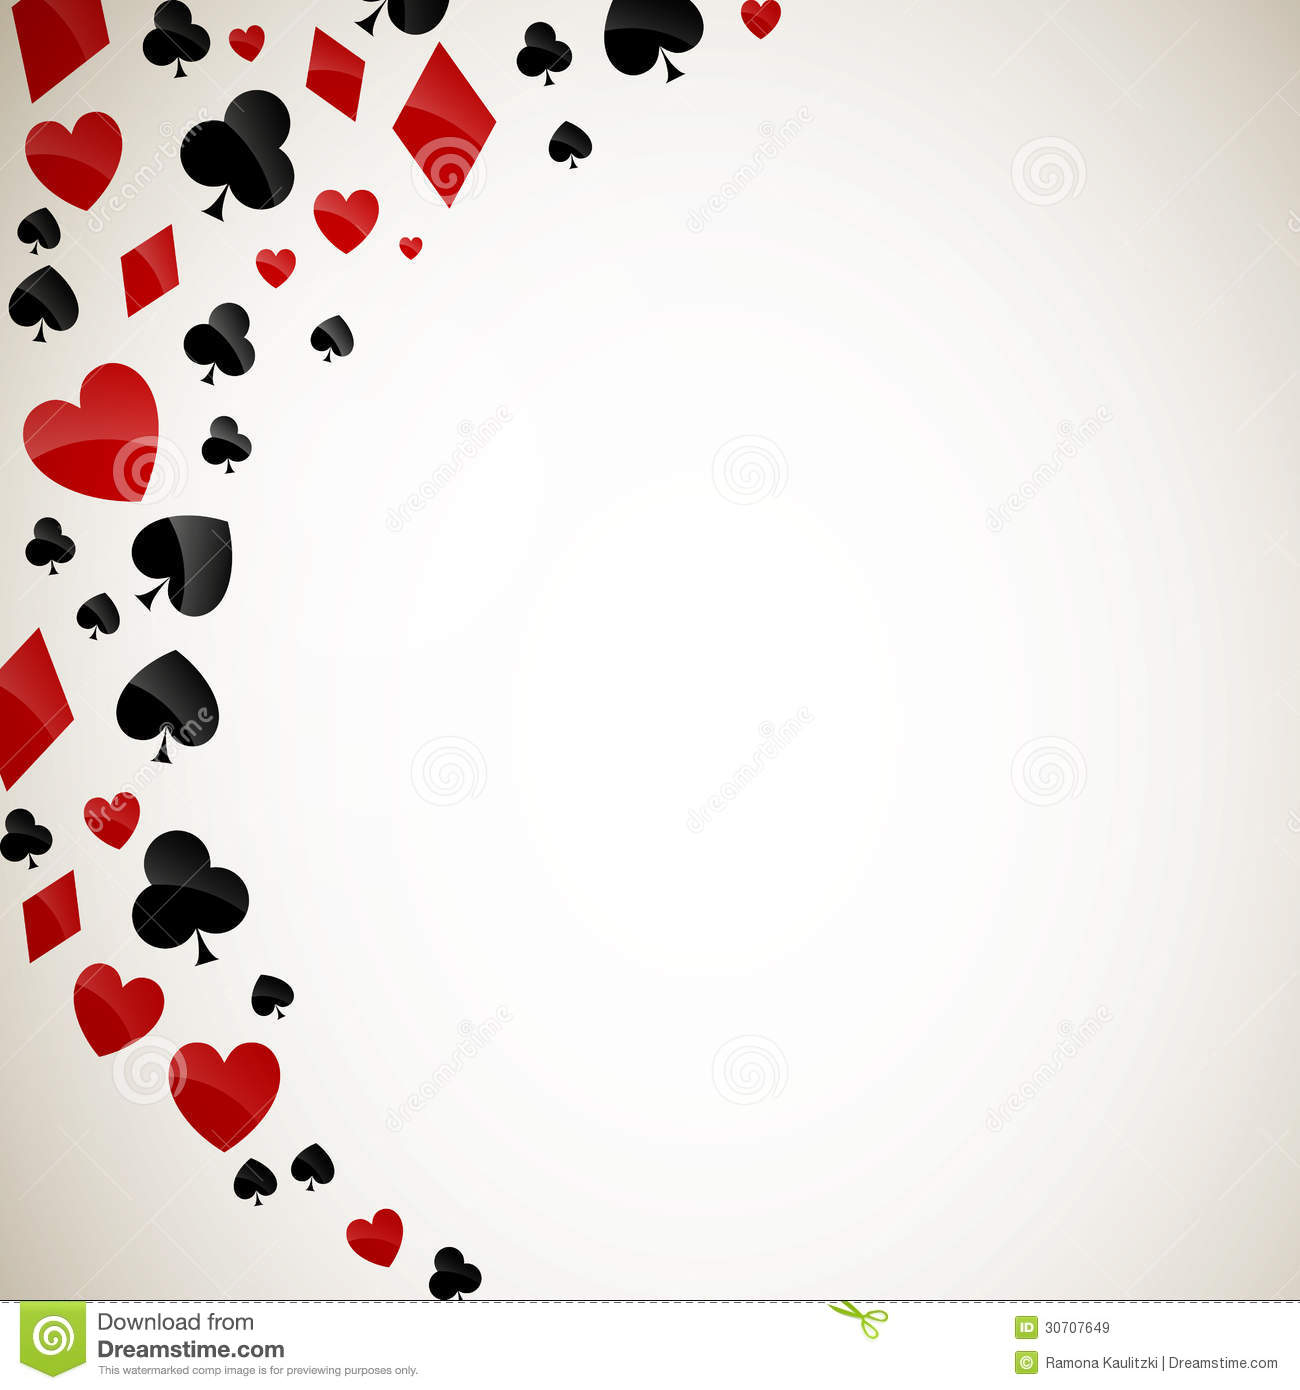 Playing Card Suits Royalty Free Stock Images   Image  30707649